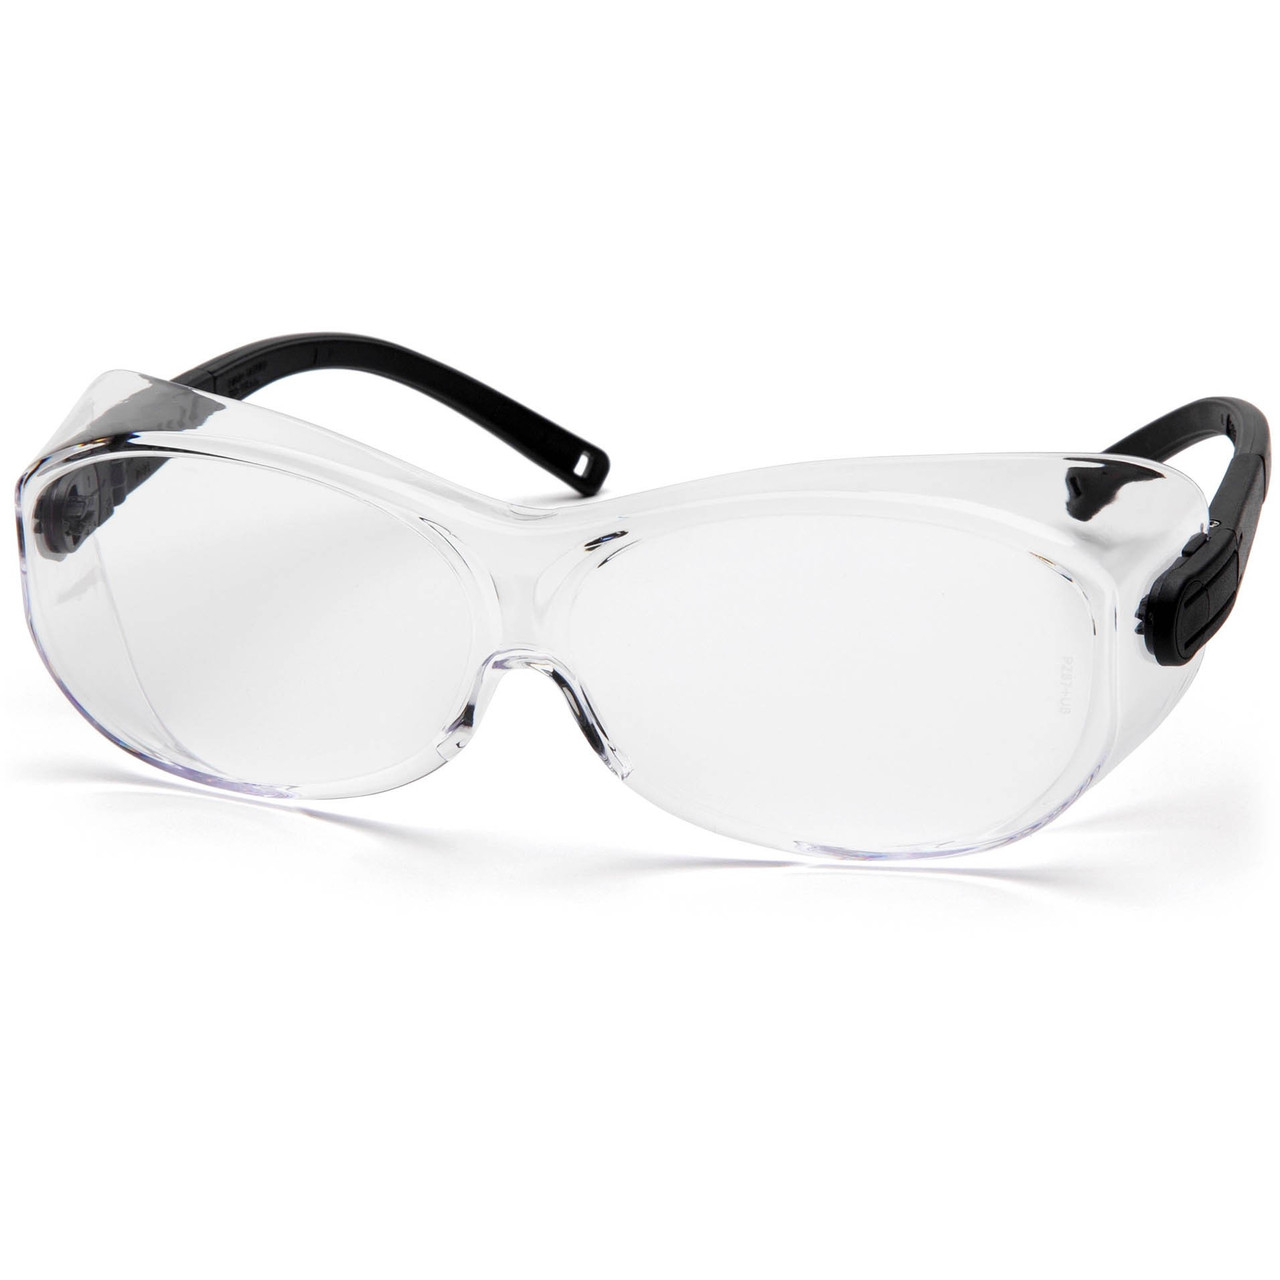 Pyramex® Ots Xl Fit Over Perscription Eyewear Safety Glasses Eye And Face Protection Gands